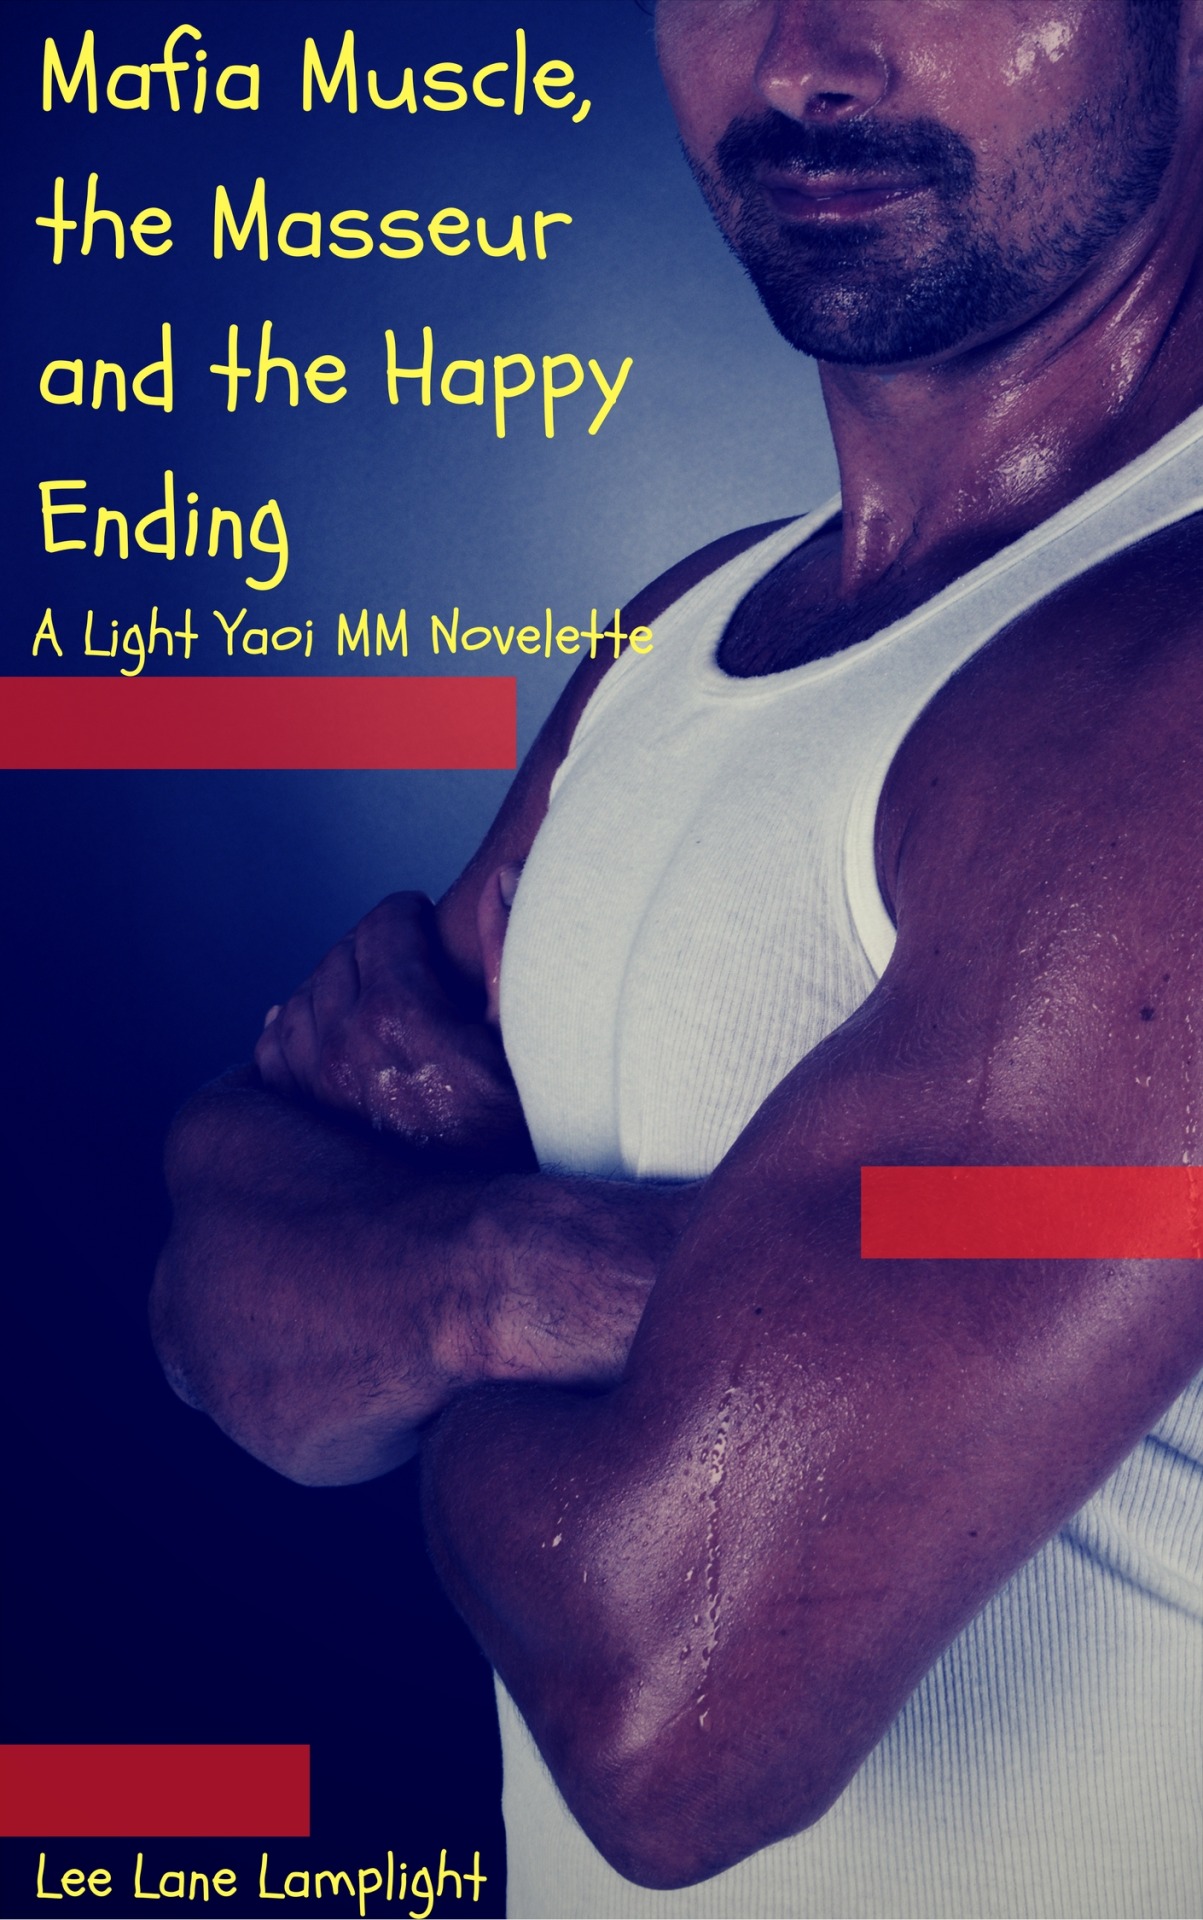 Mafia Muscle, the Masseur and the Happy Ending